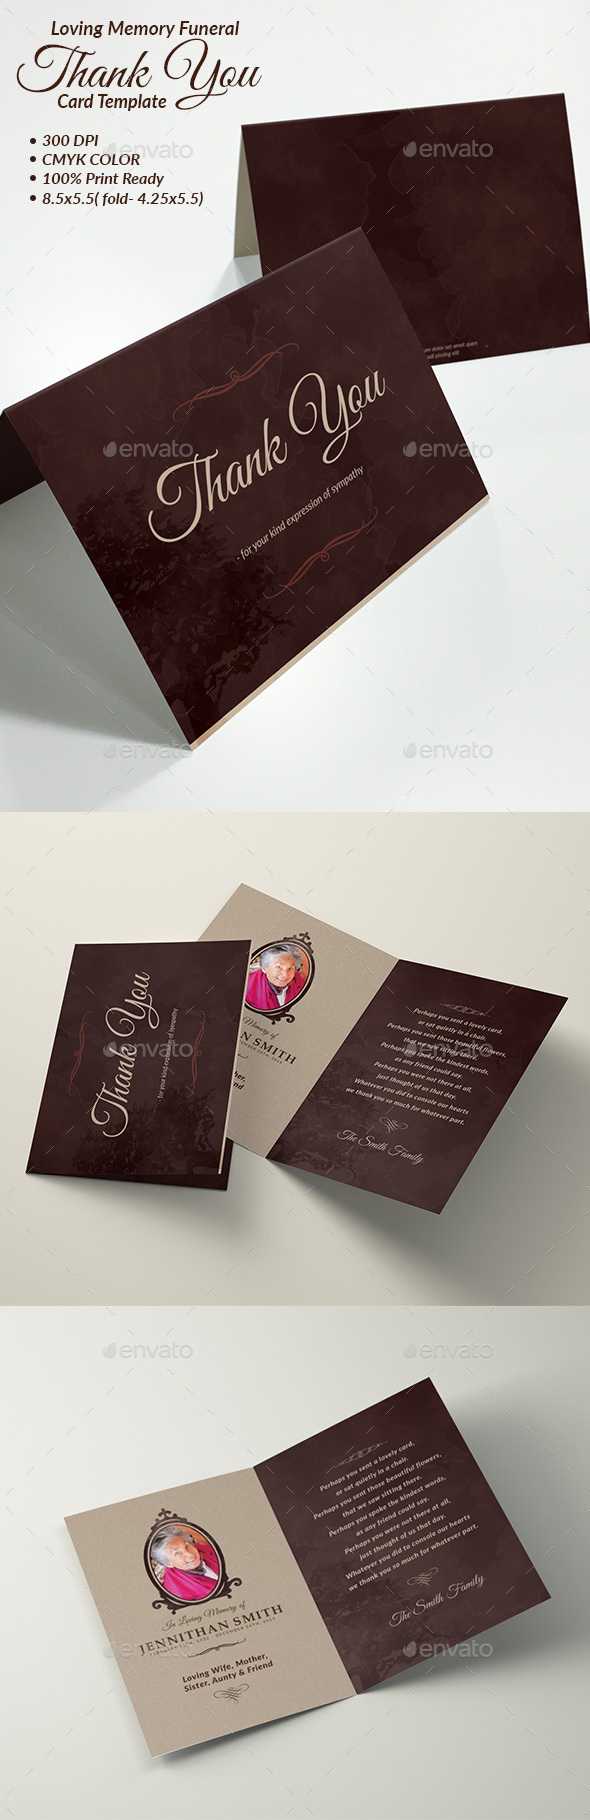 In Memory Of Graphics, Designs & Templates From Graphicriver Pertaining To In Memory Cards Templates